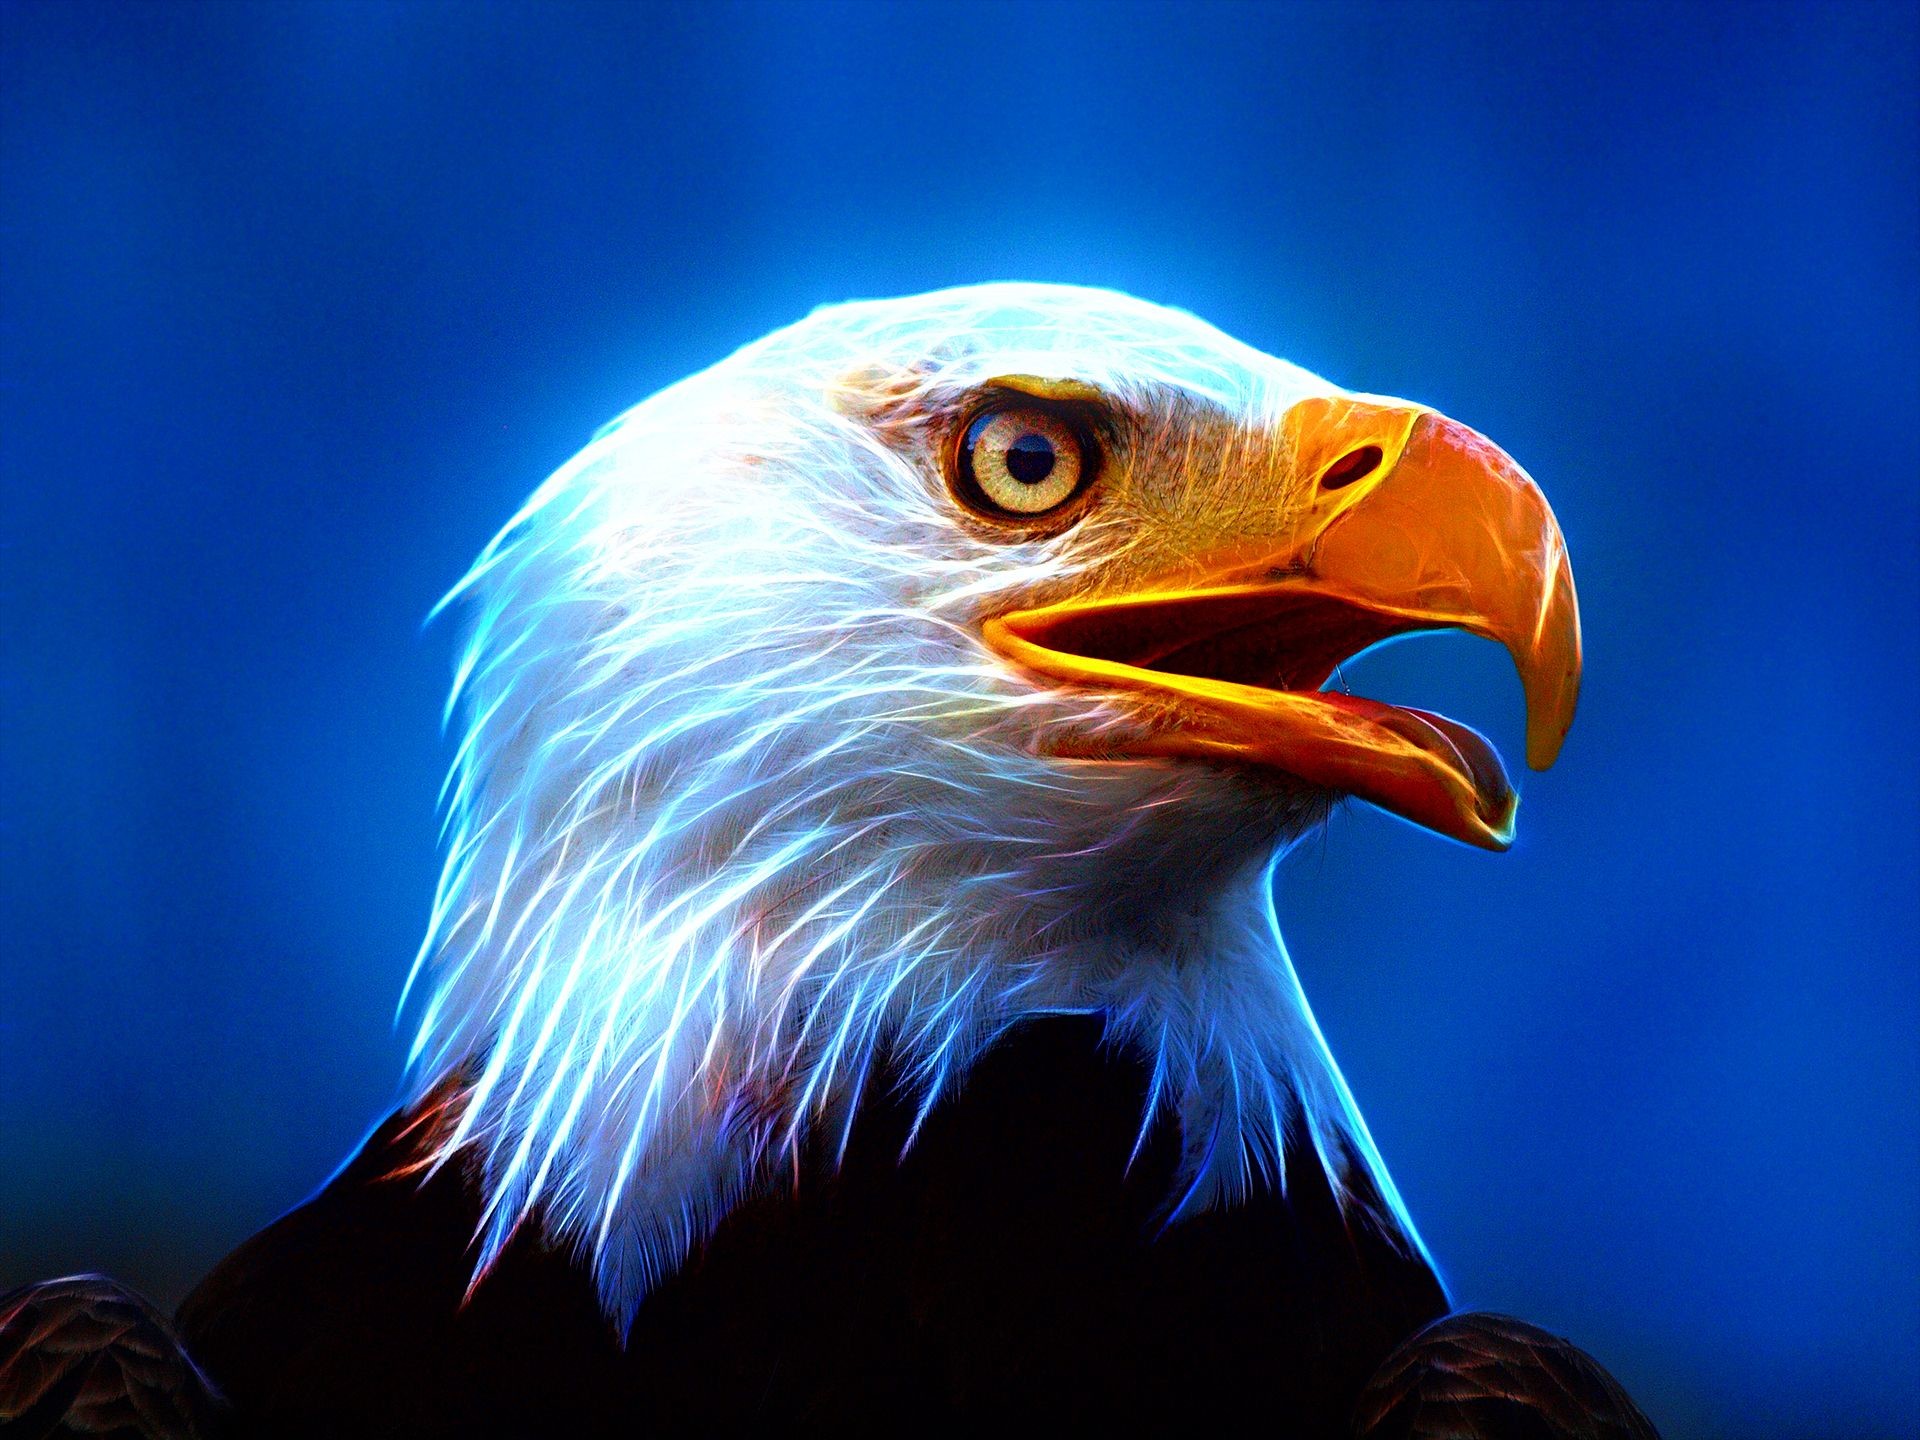 Res - 1920x1200, - Eagle Photos Hd Download , HD Wallpaper & Backgrounds